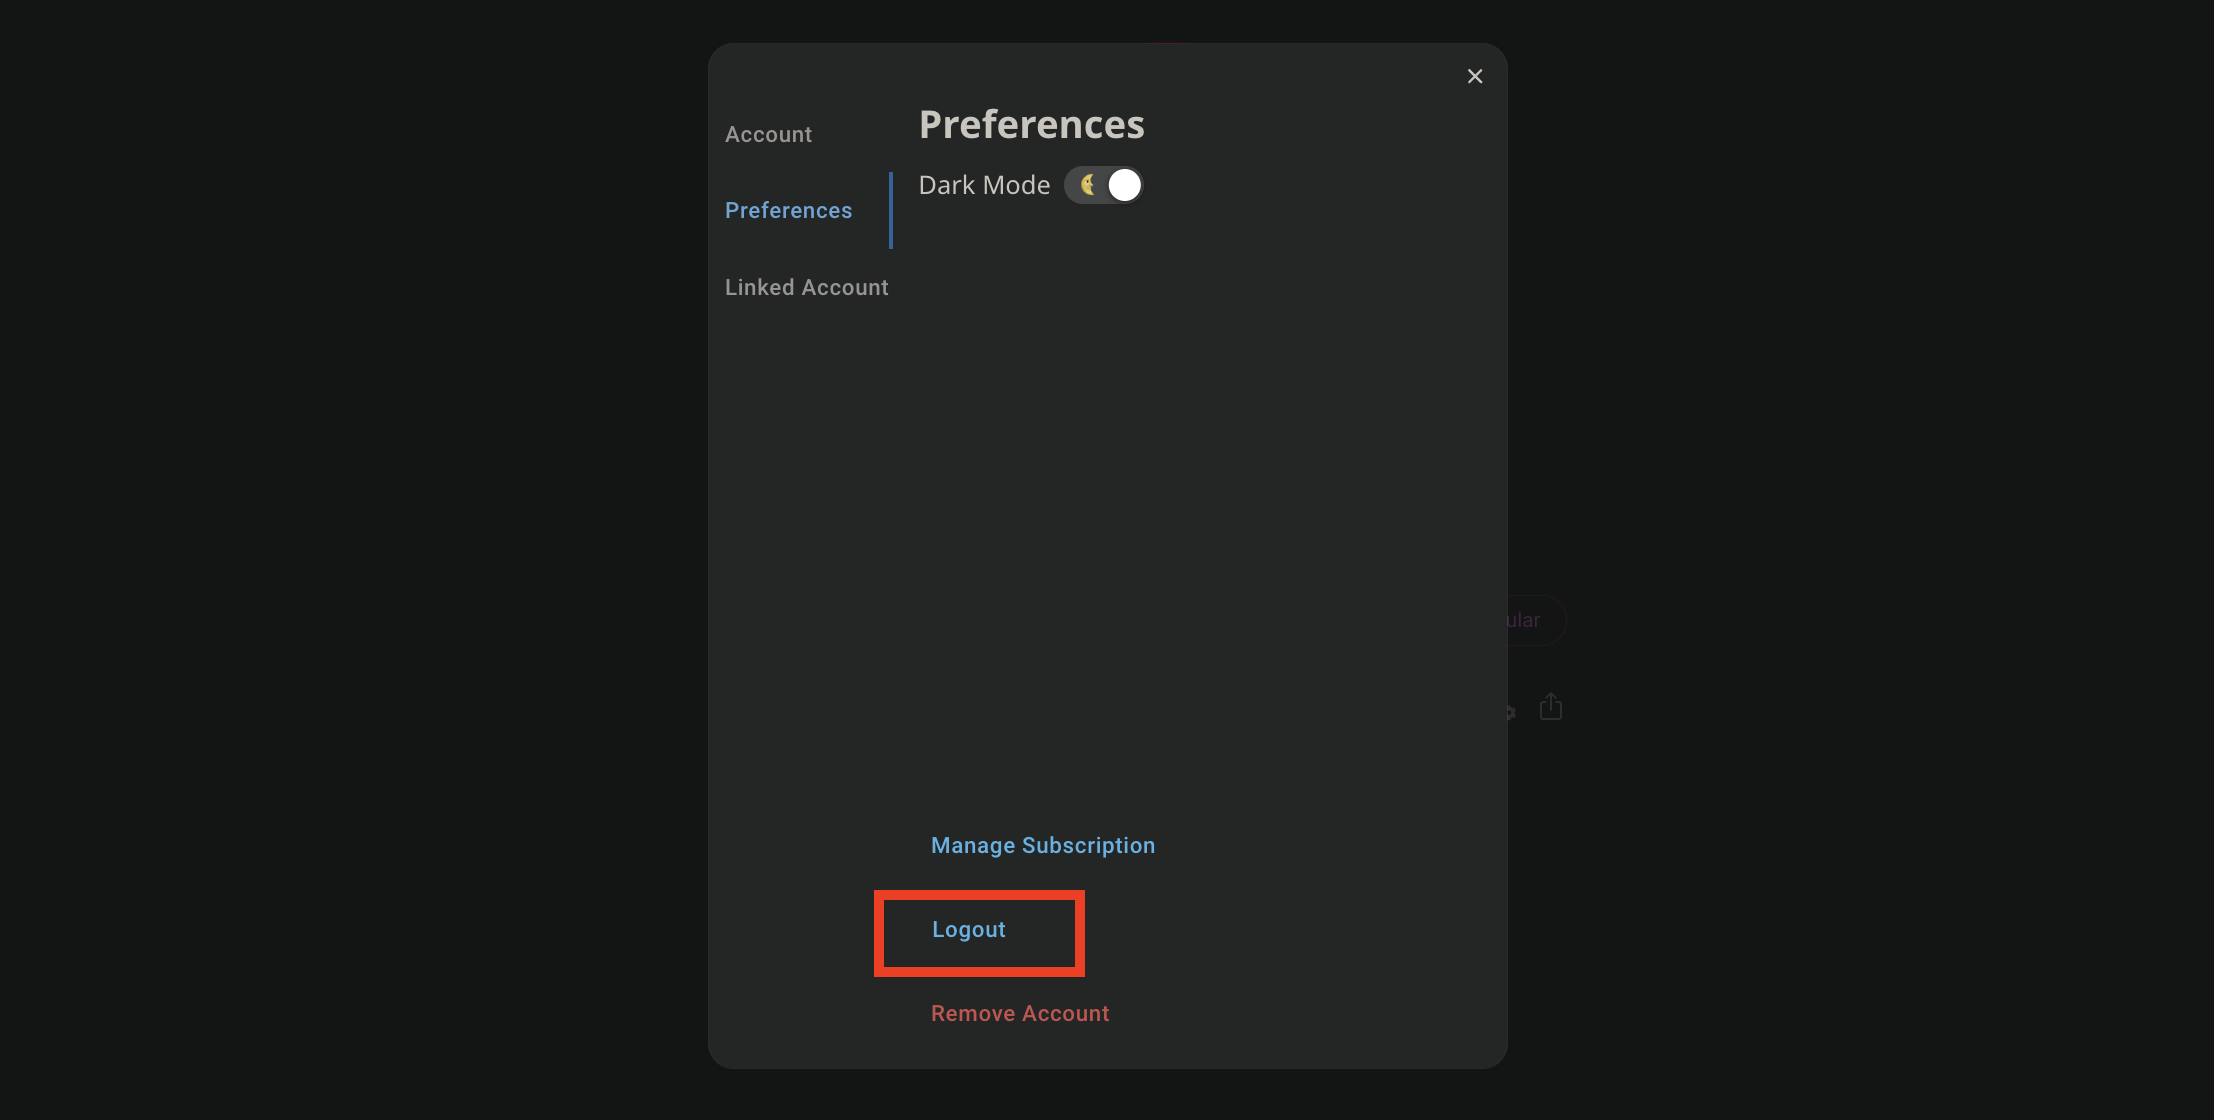 Choose Preferences and click Log out.